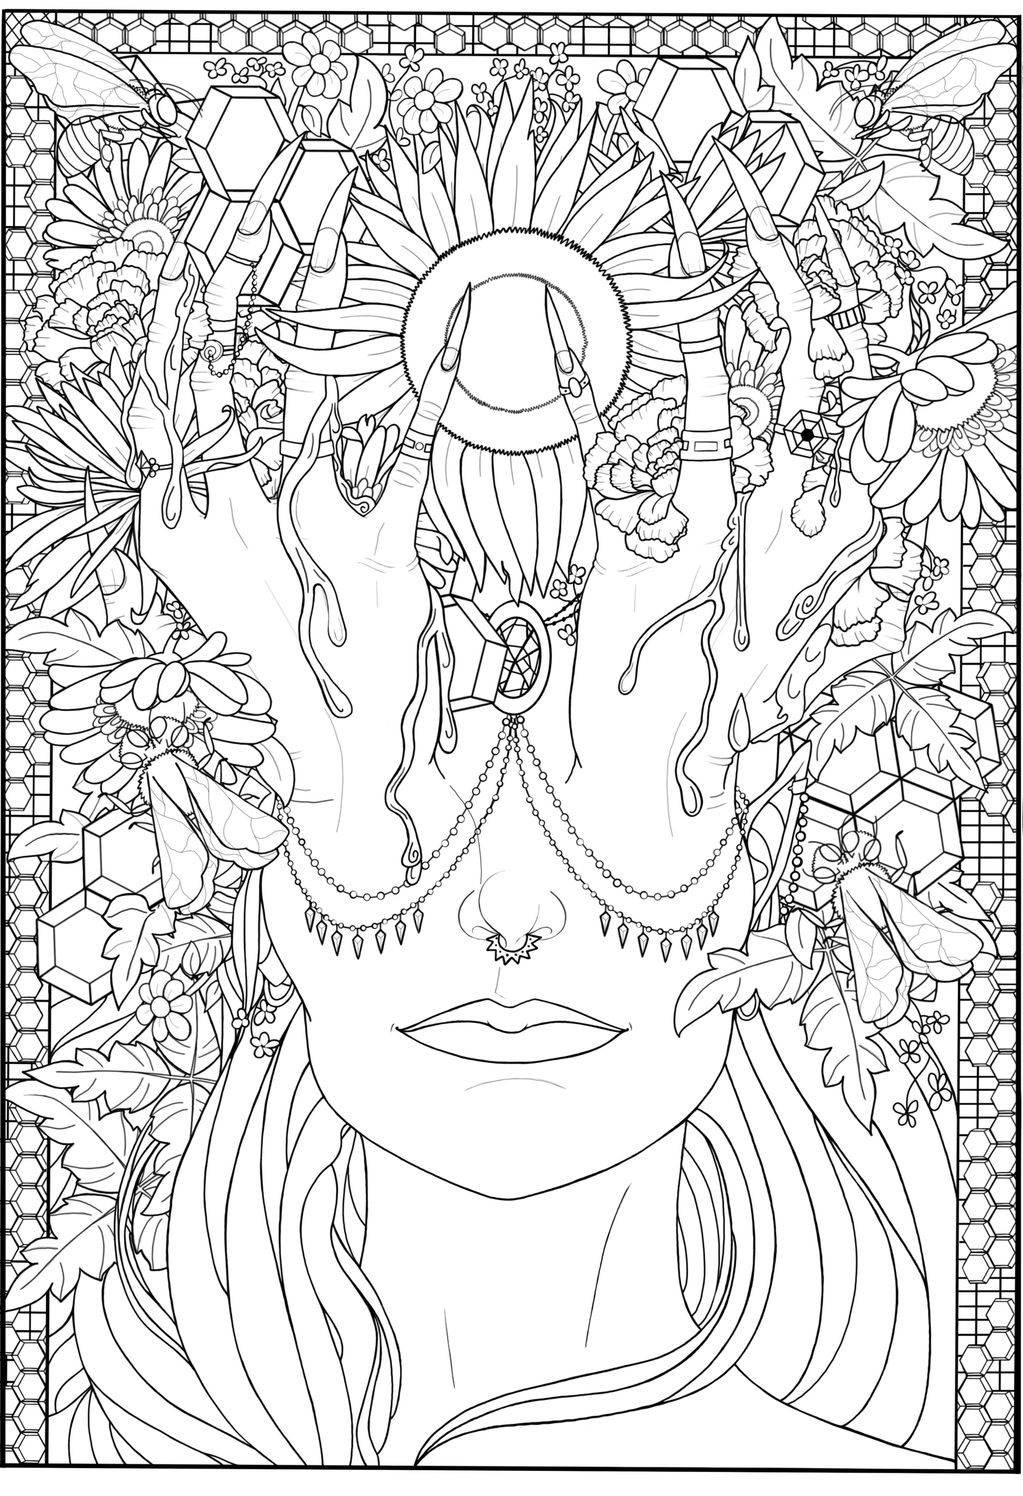 Goddess with hands growing from her head and a crown of flowers surrounded by double headed bees.